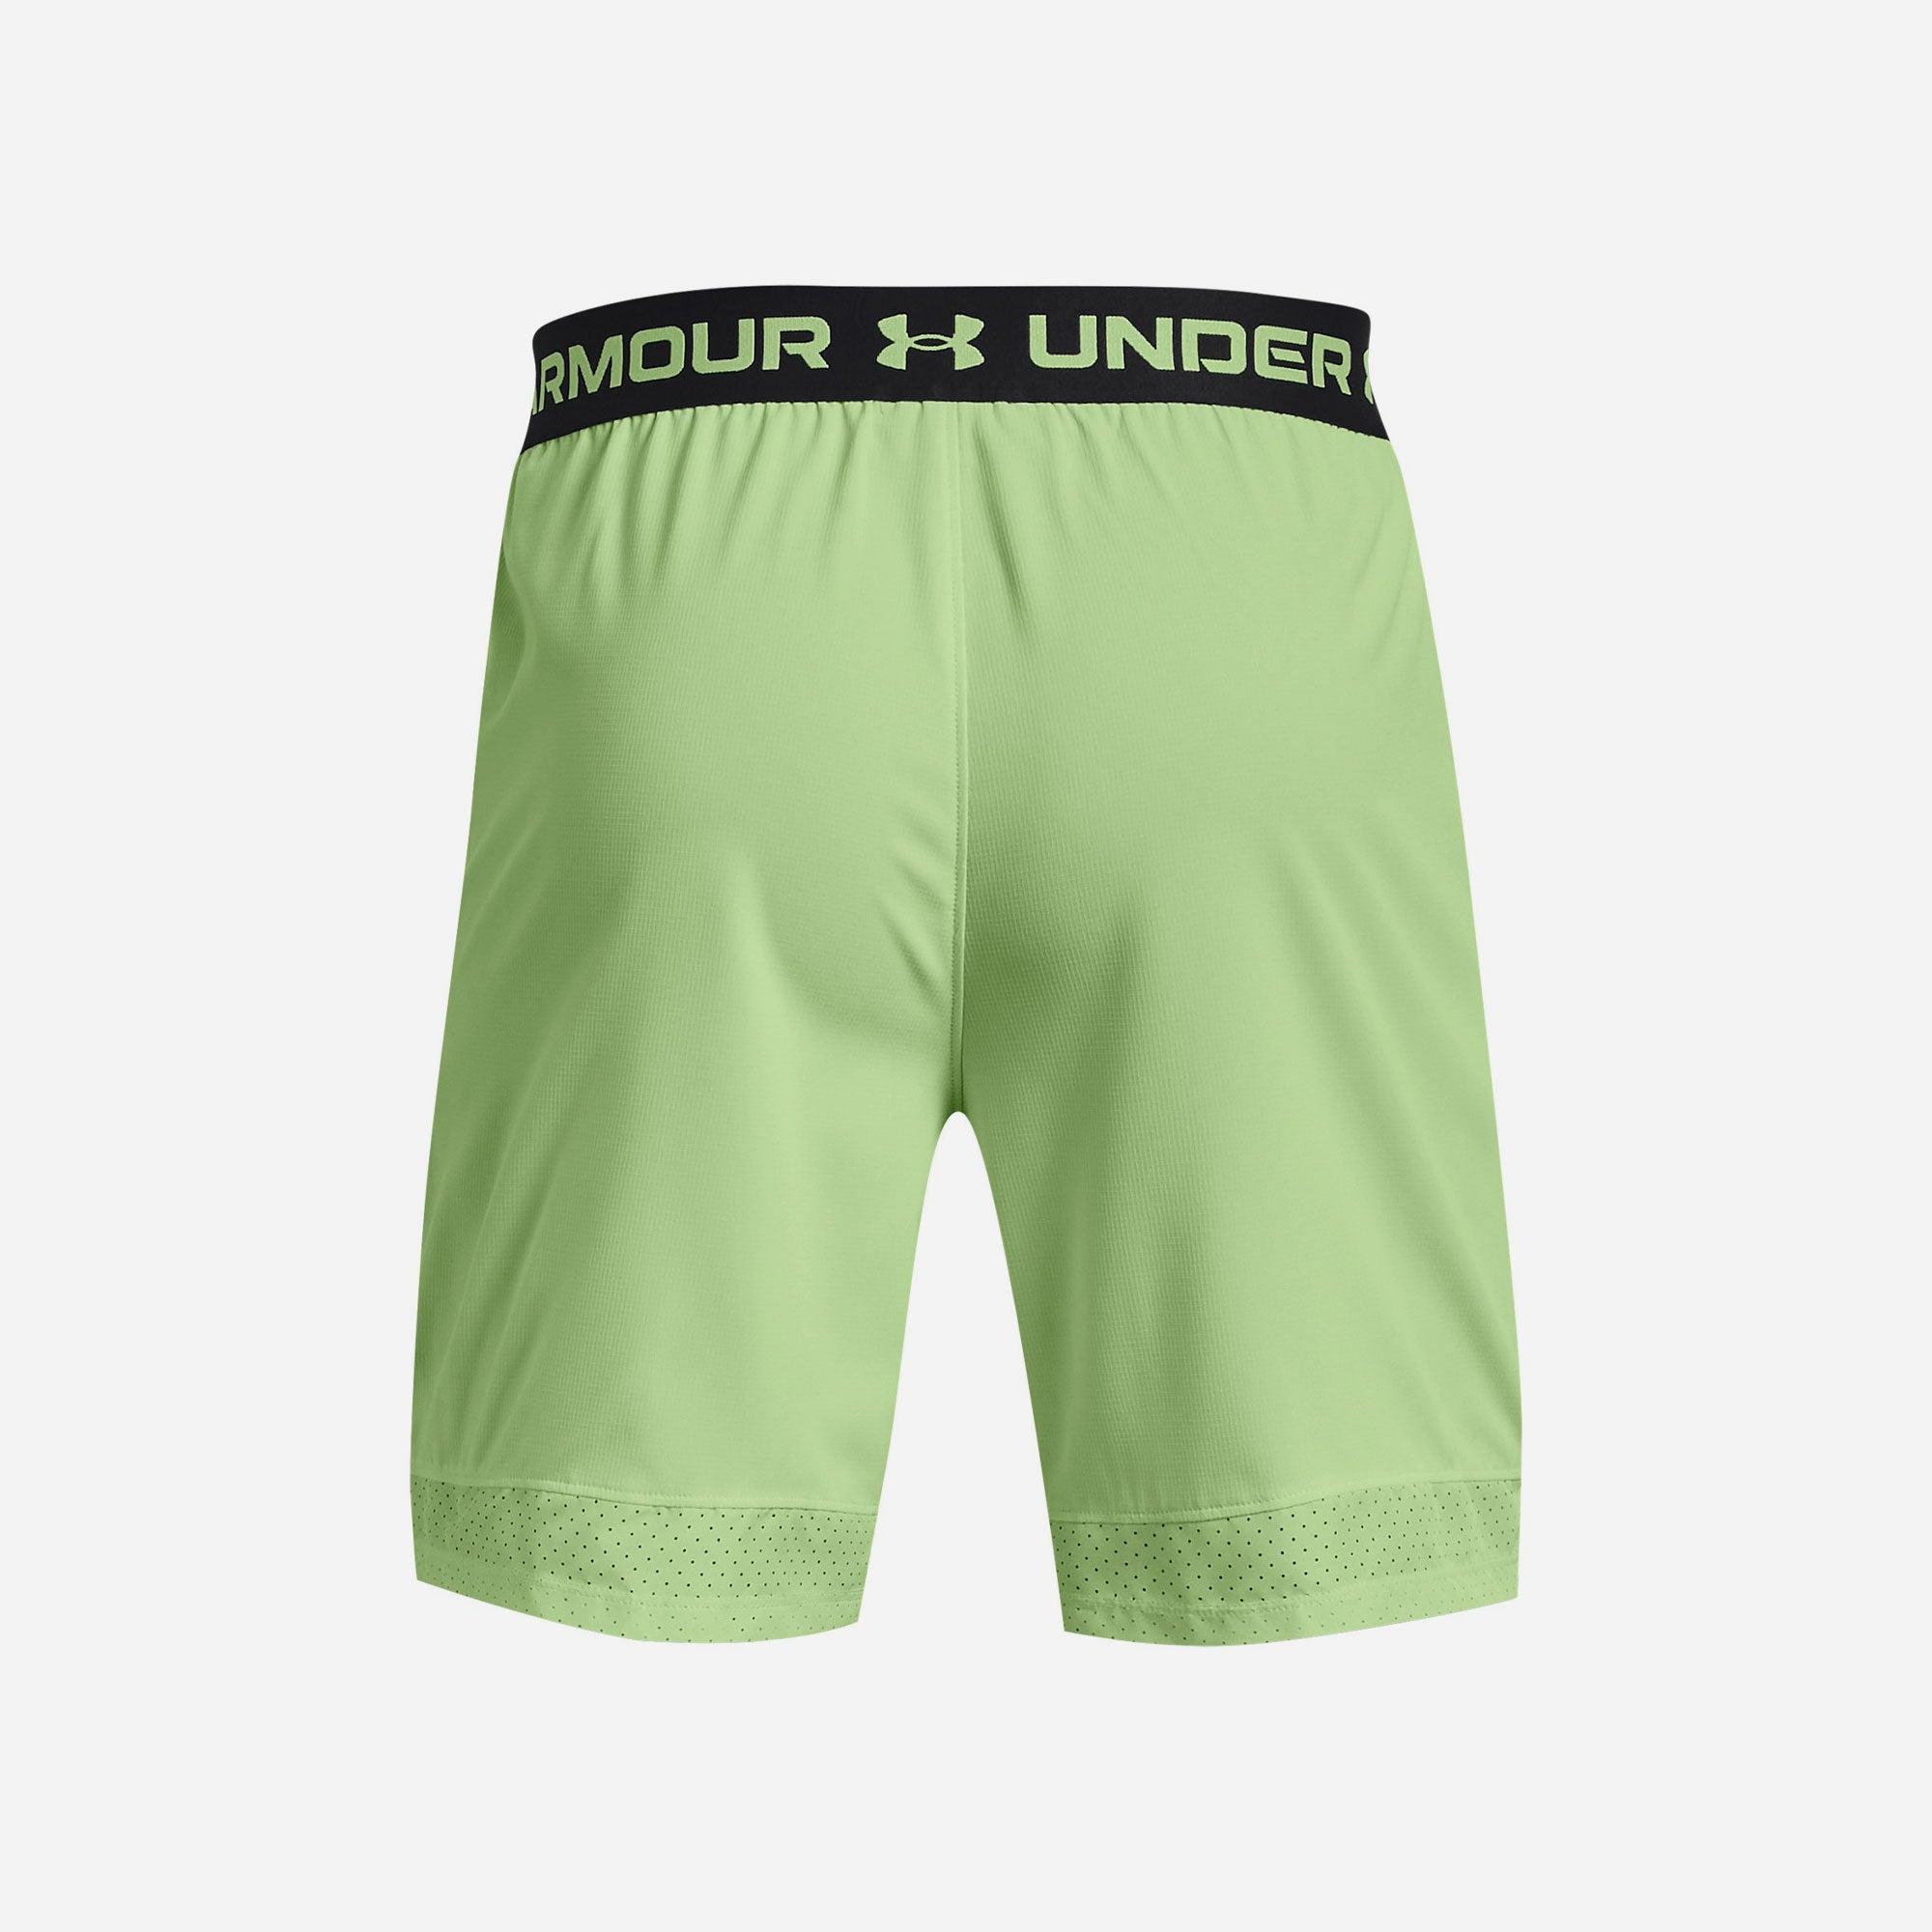 Quần ngắn thể thao nam Under Armour Vanish Woven 6In S - 1373718-334